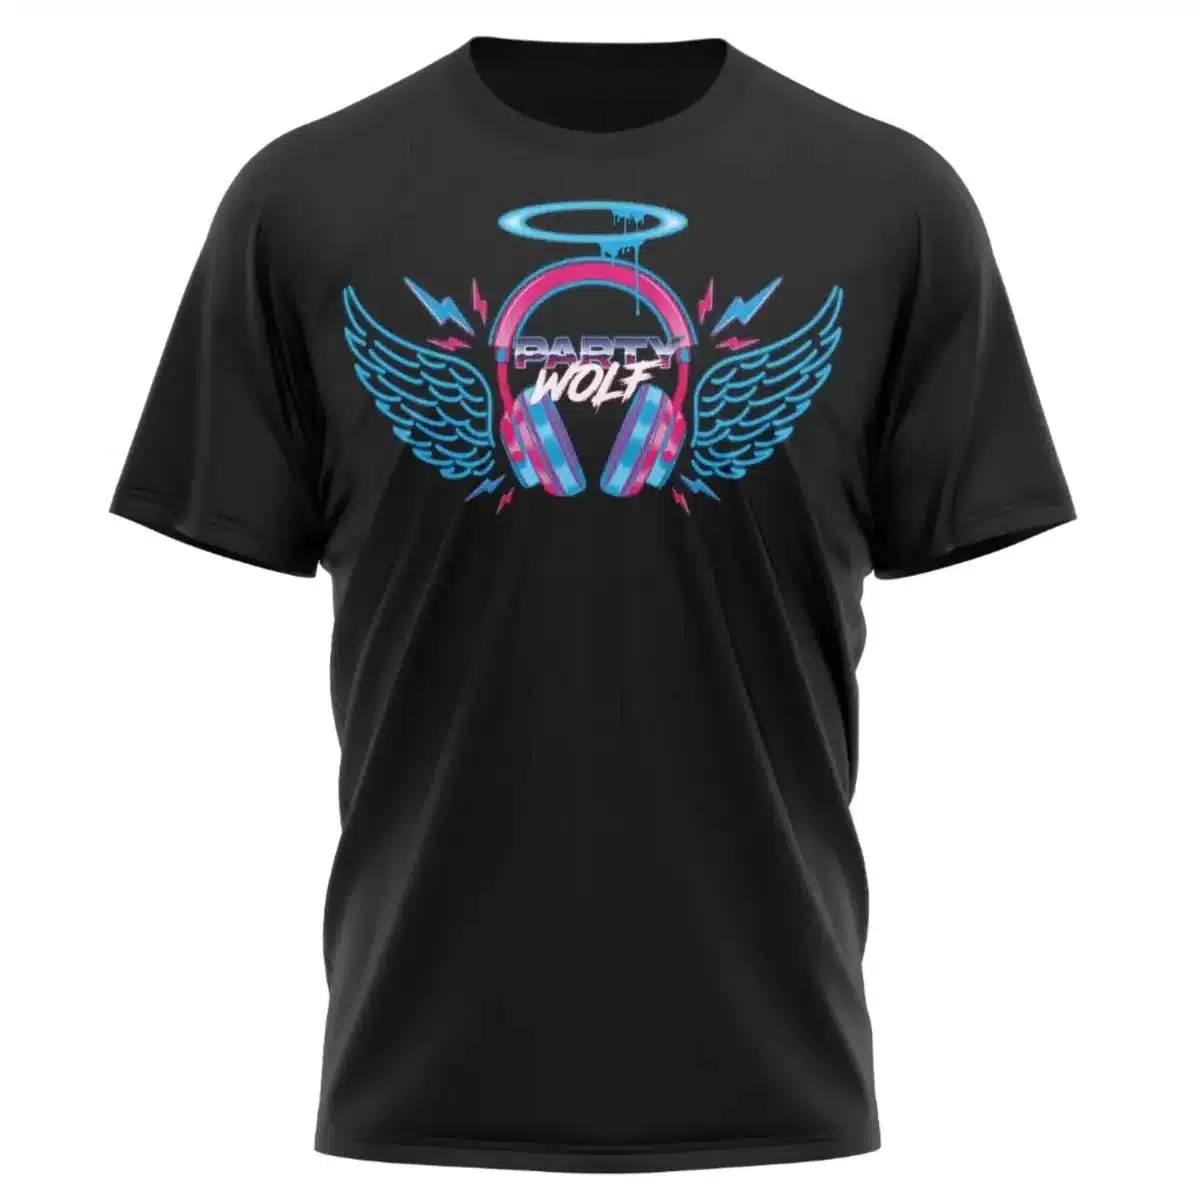 Headphones T-Shirt by Party Wolf Clothing